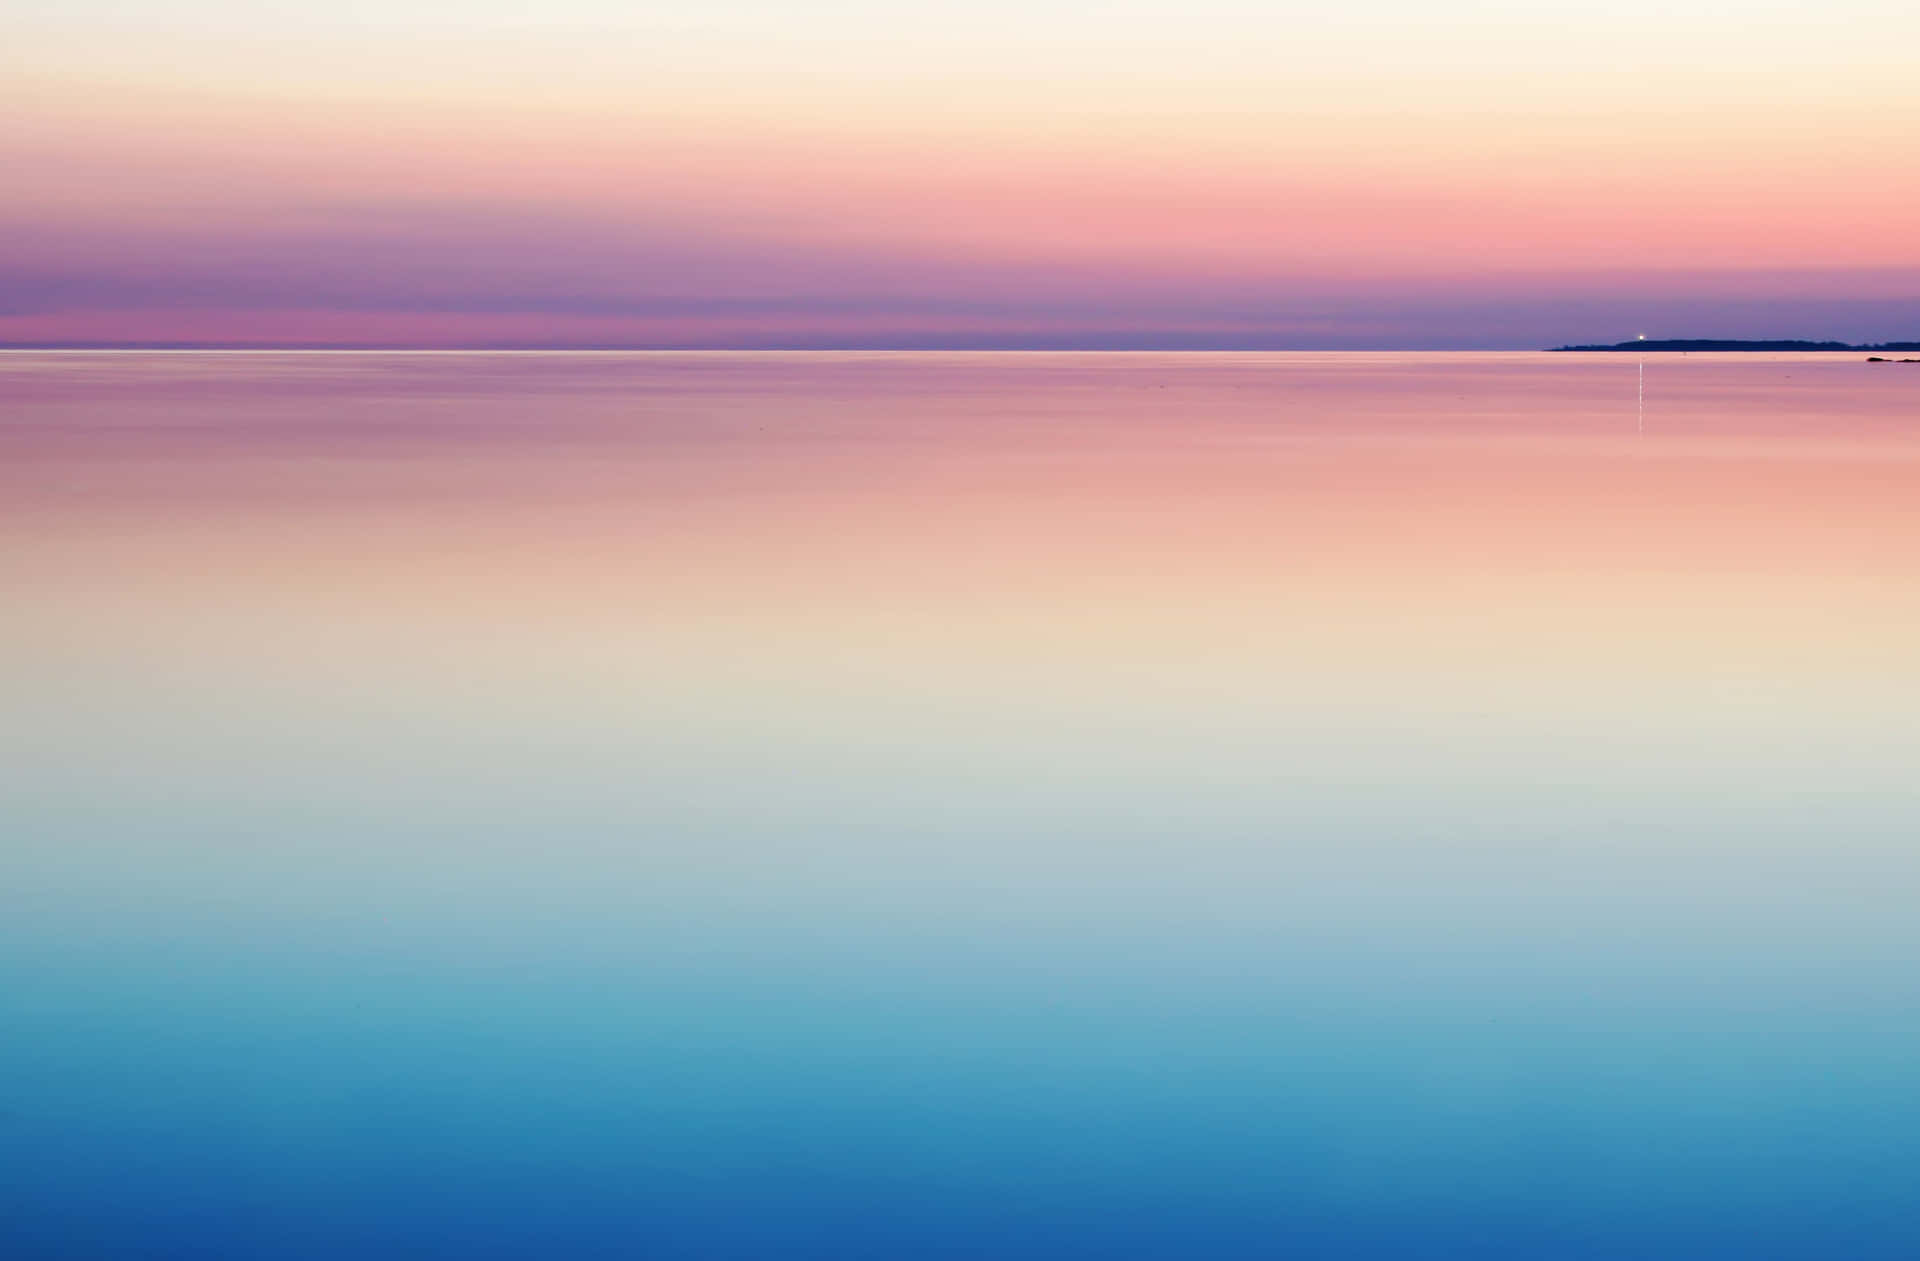 Blue And Purple Sunset With Calm Waters Wallpaper